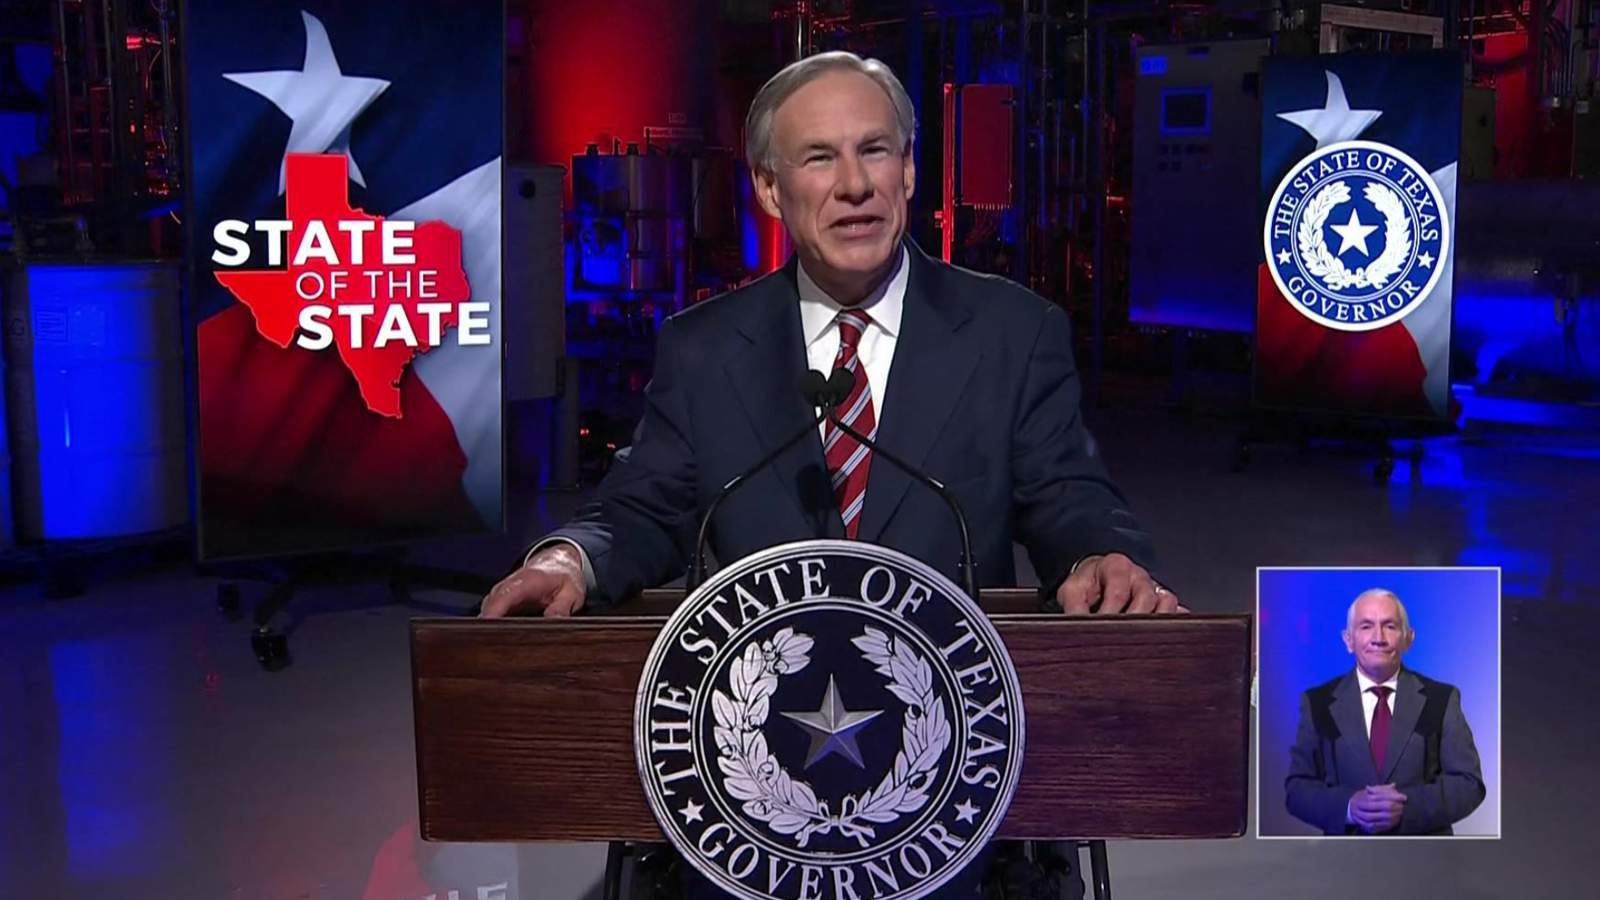 WATCH: Gov. Abbott to deliver State of the State address Monday night